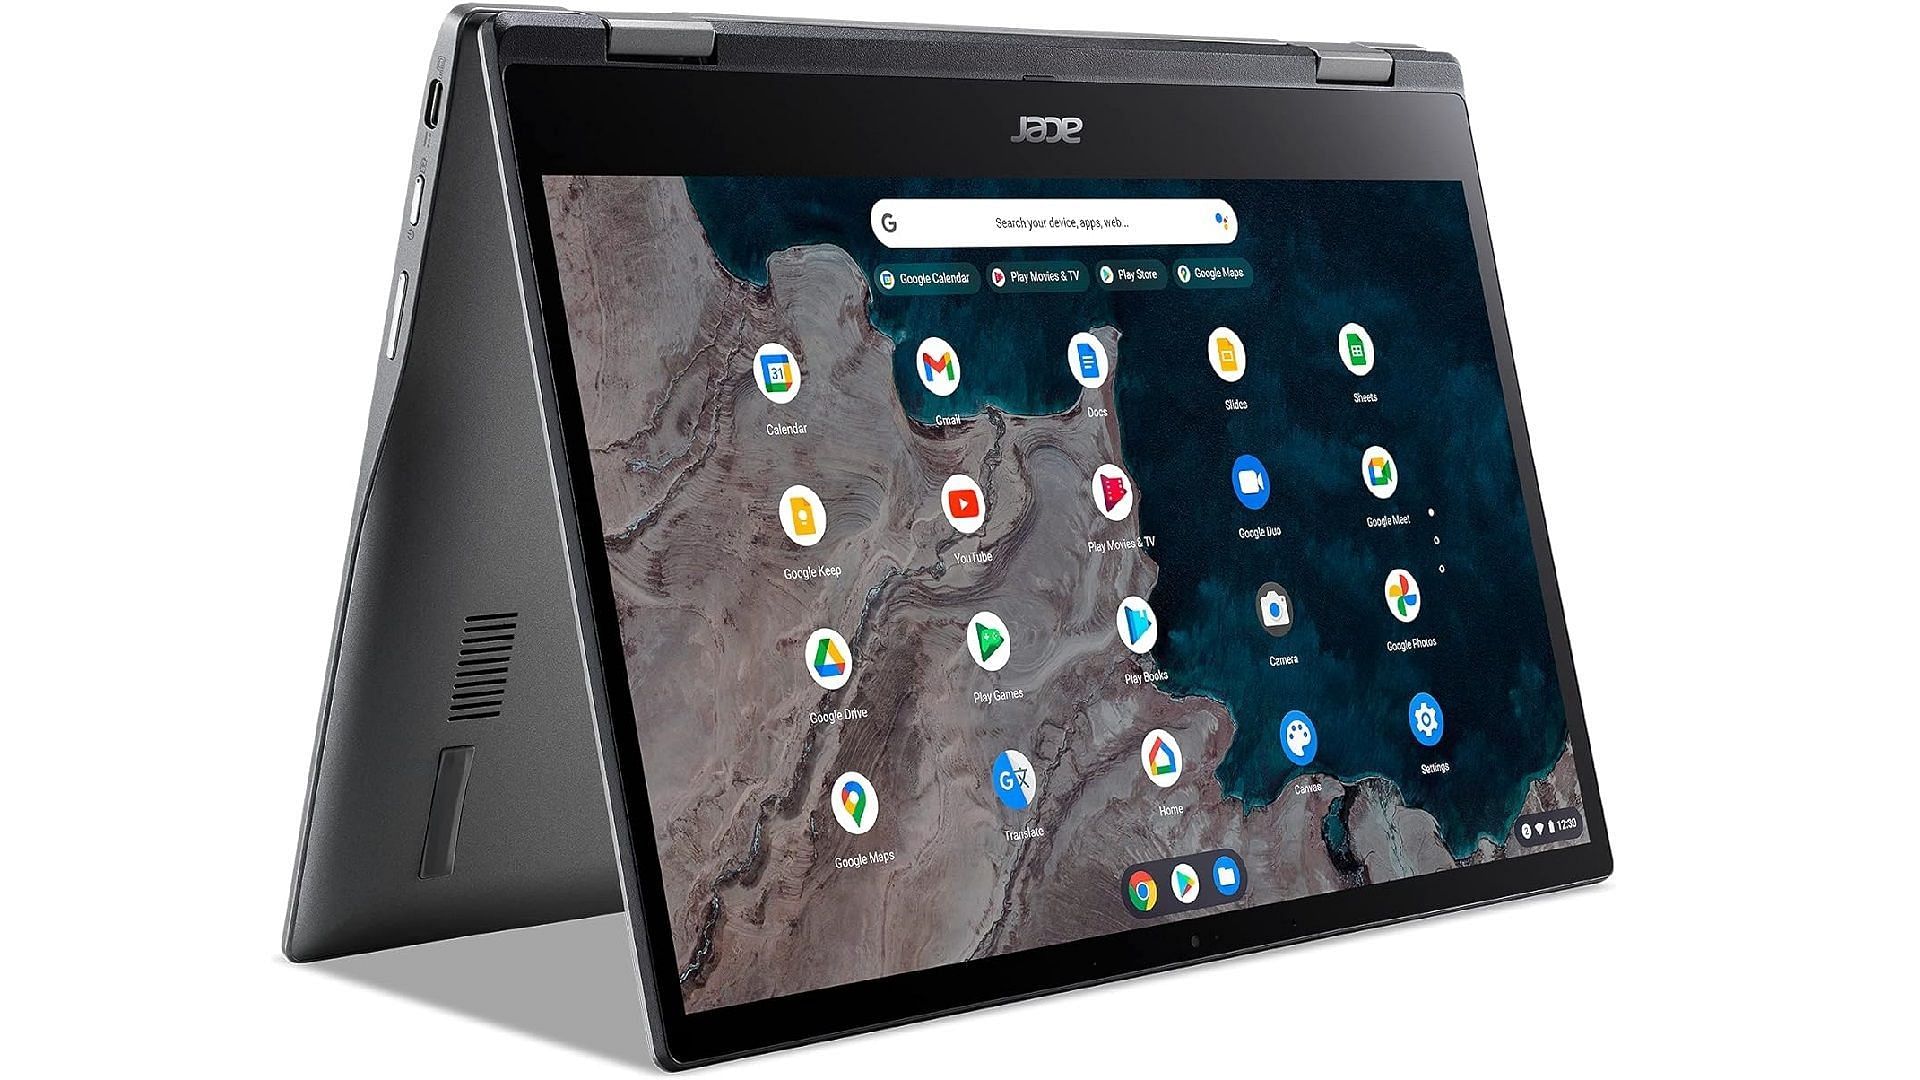 Acer Chromebook Spin 513 Convertible Laptop (Image via Acer)